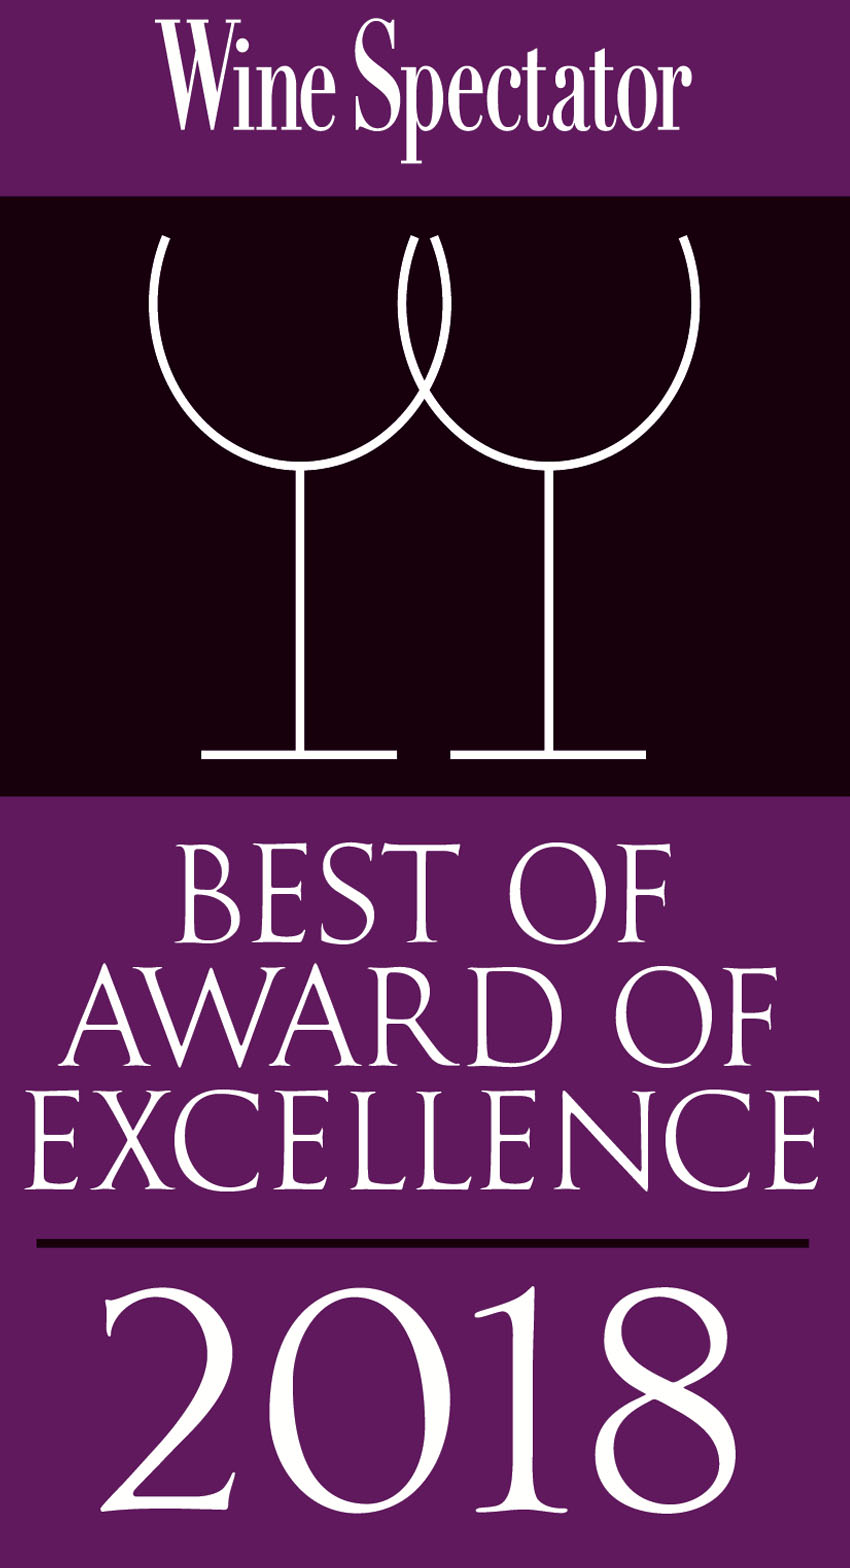 Stake Chophouse & Bar best steakhouse san diego wine spectator best of award of excellence